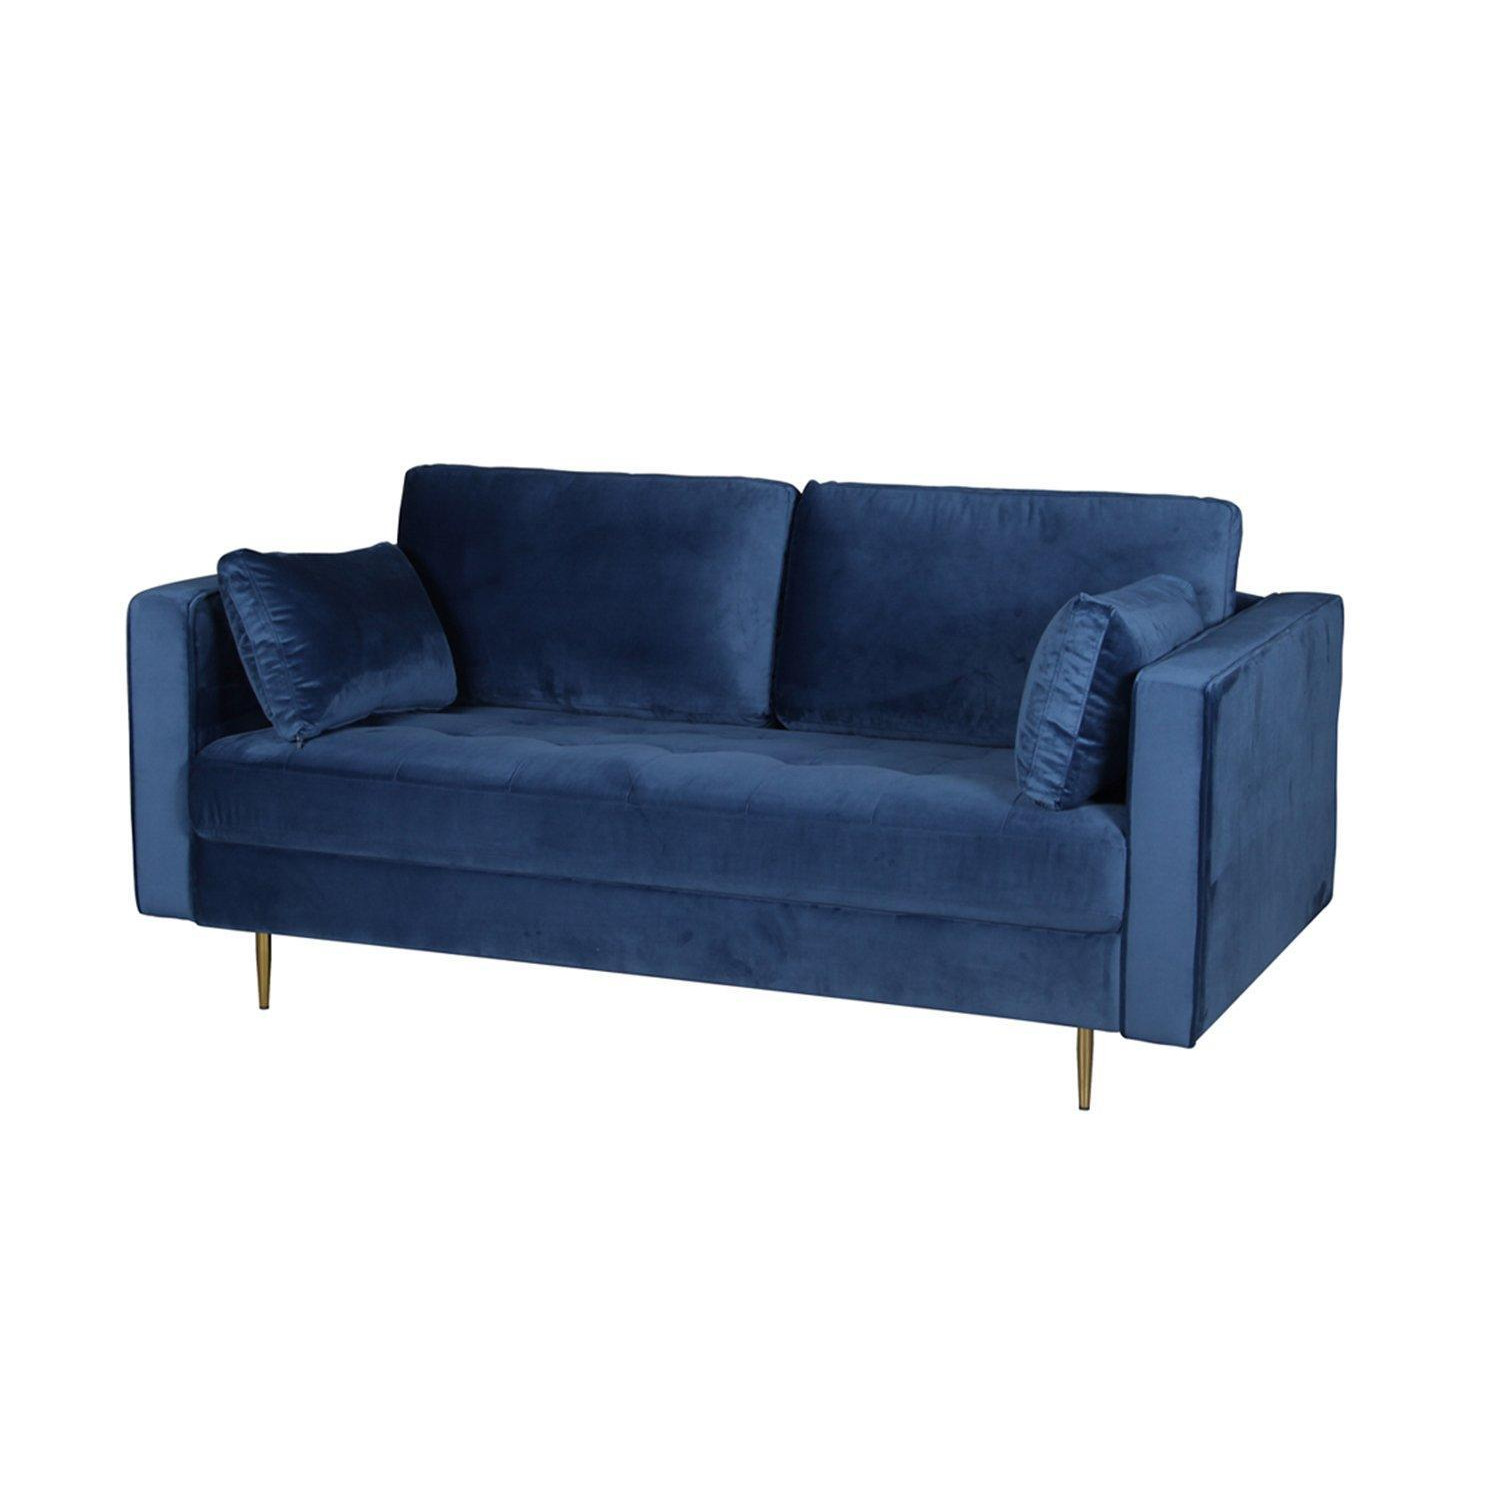 Avery Velvet 2 Seater Sofa with 2 Scatter Cushions - image 1